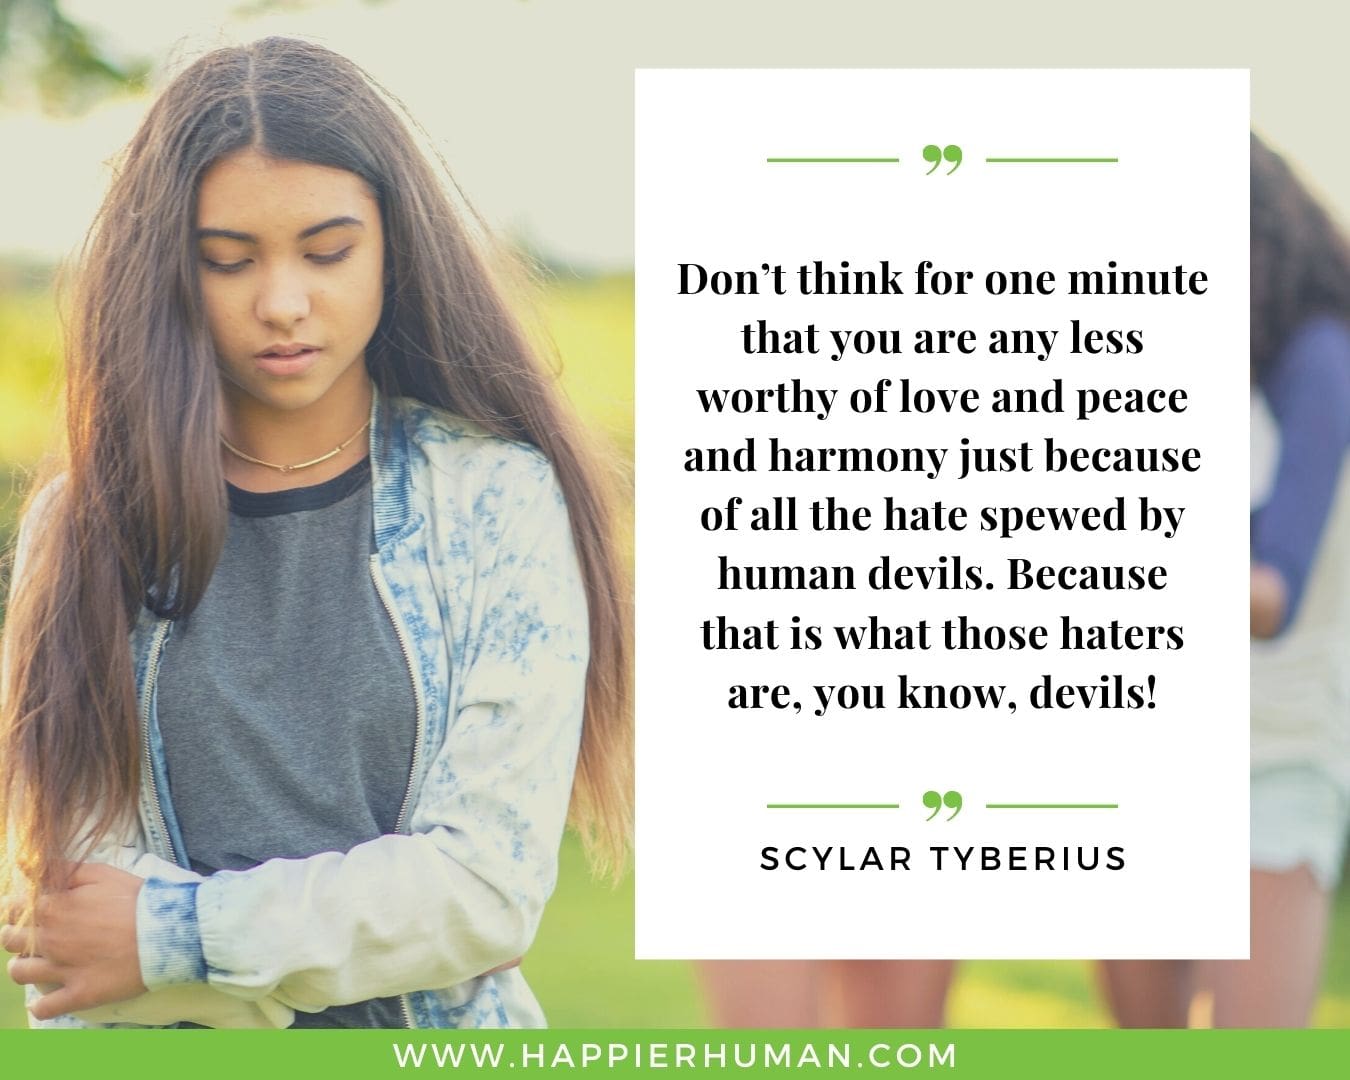 Haters Quotes - “Don’t think for one minute that you are any less worthy of love and peace and harmony just because of all the hate spewed by human devils. Because that is what those haters are, you know, devils!” - Scylar Tyberius